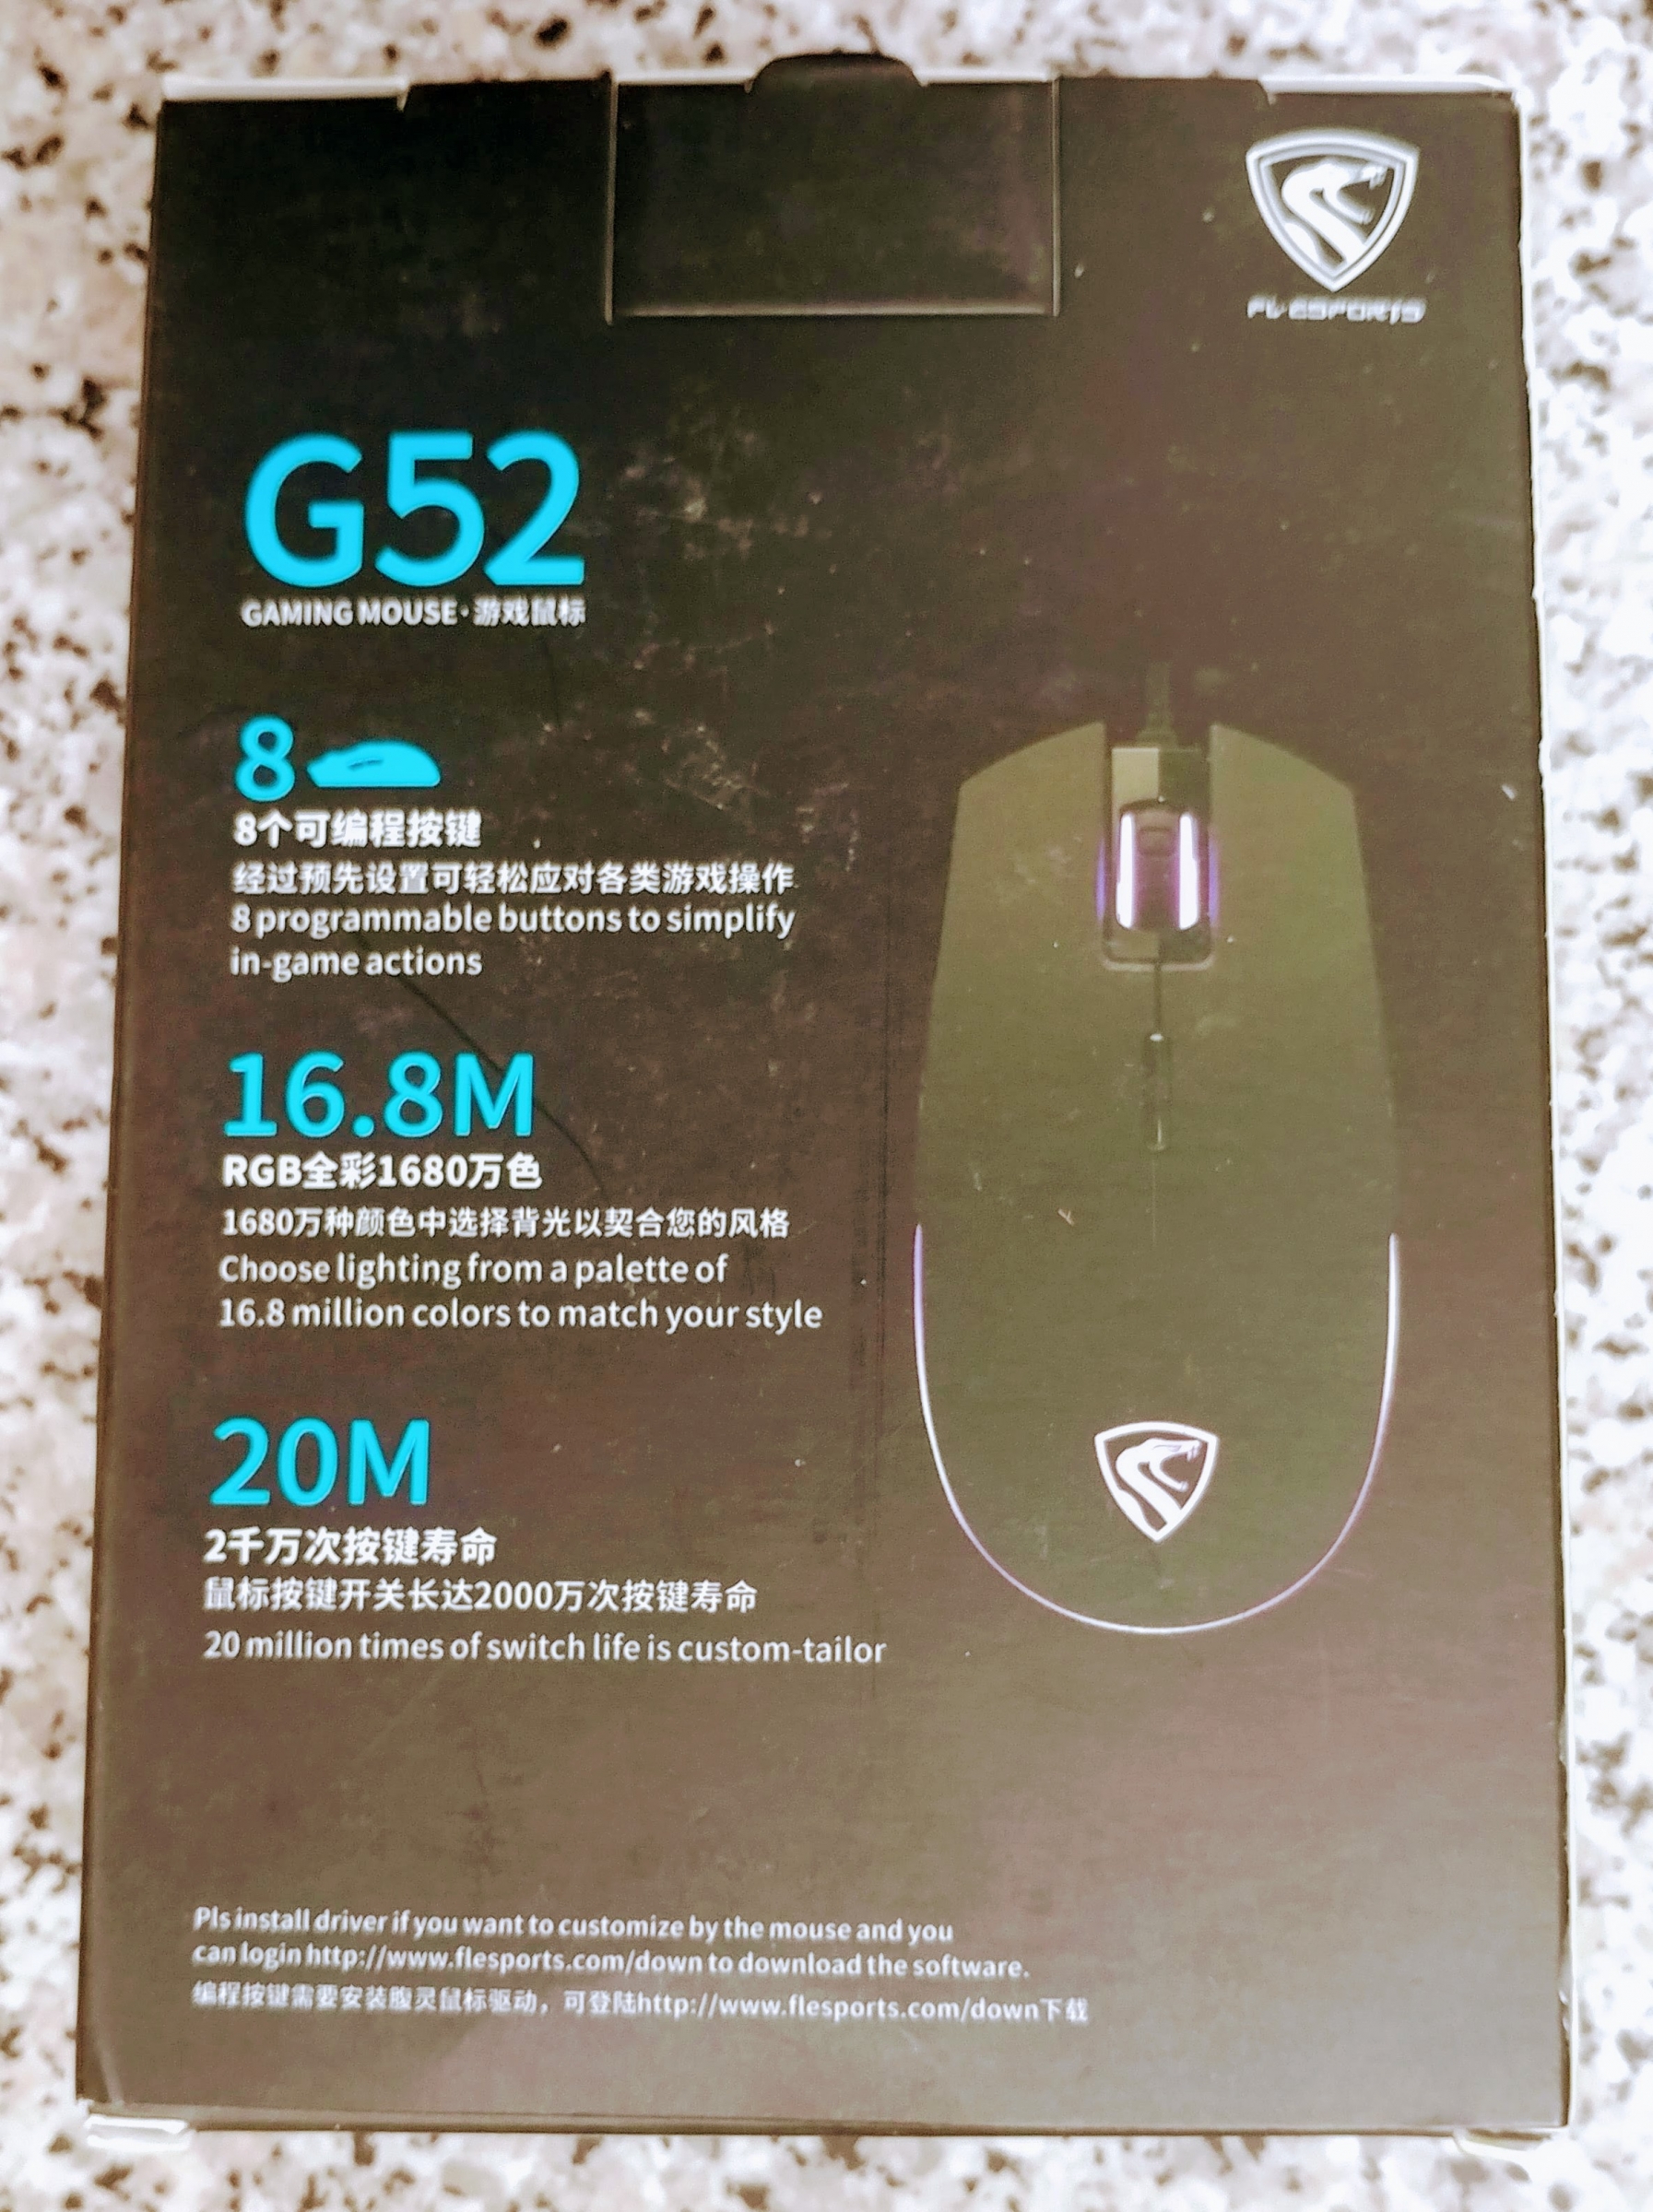 My new favorite mouse!